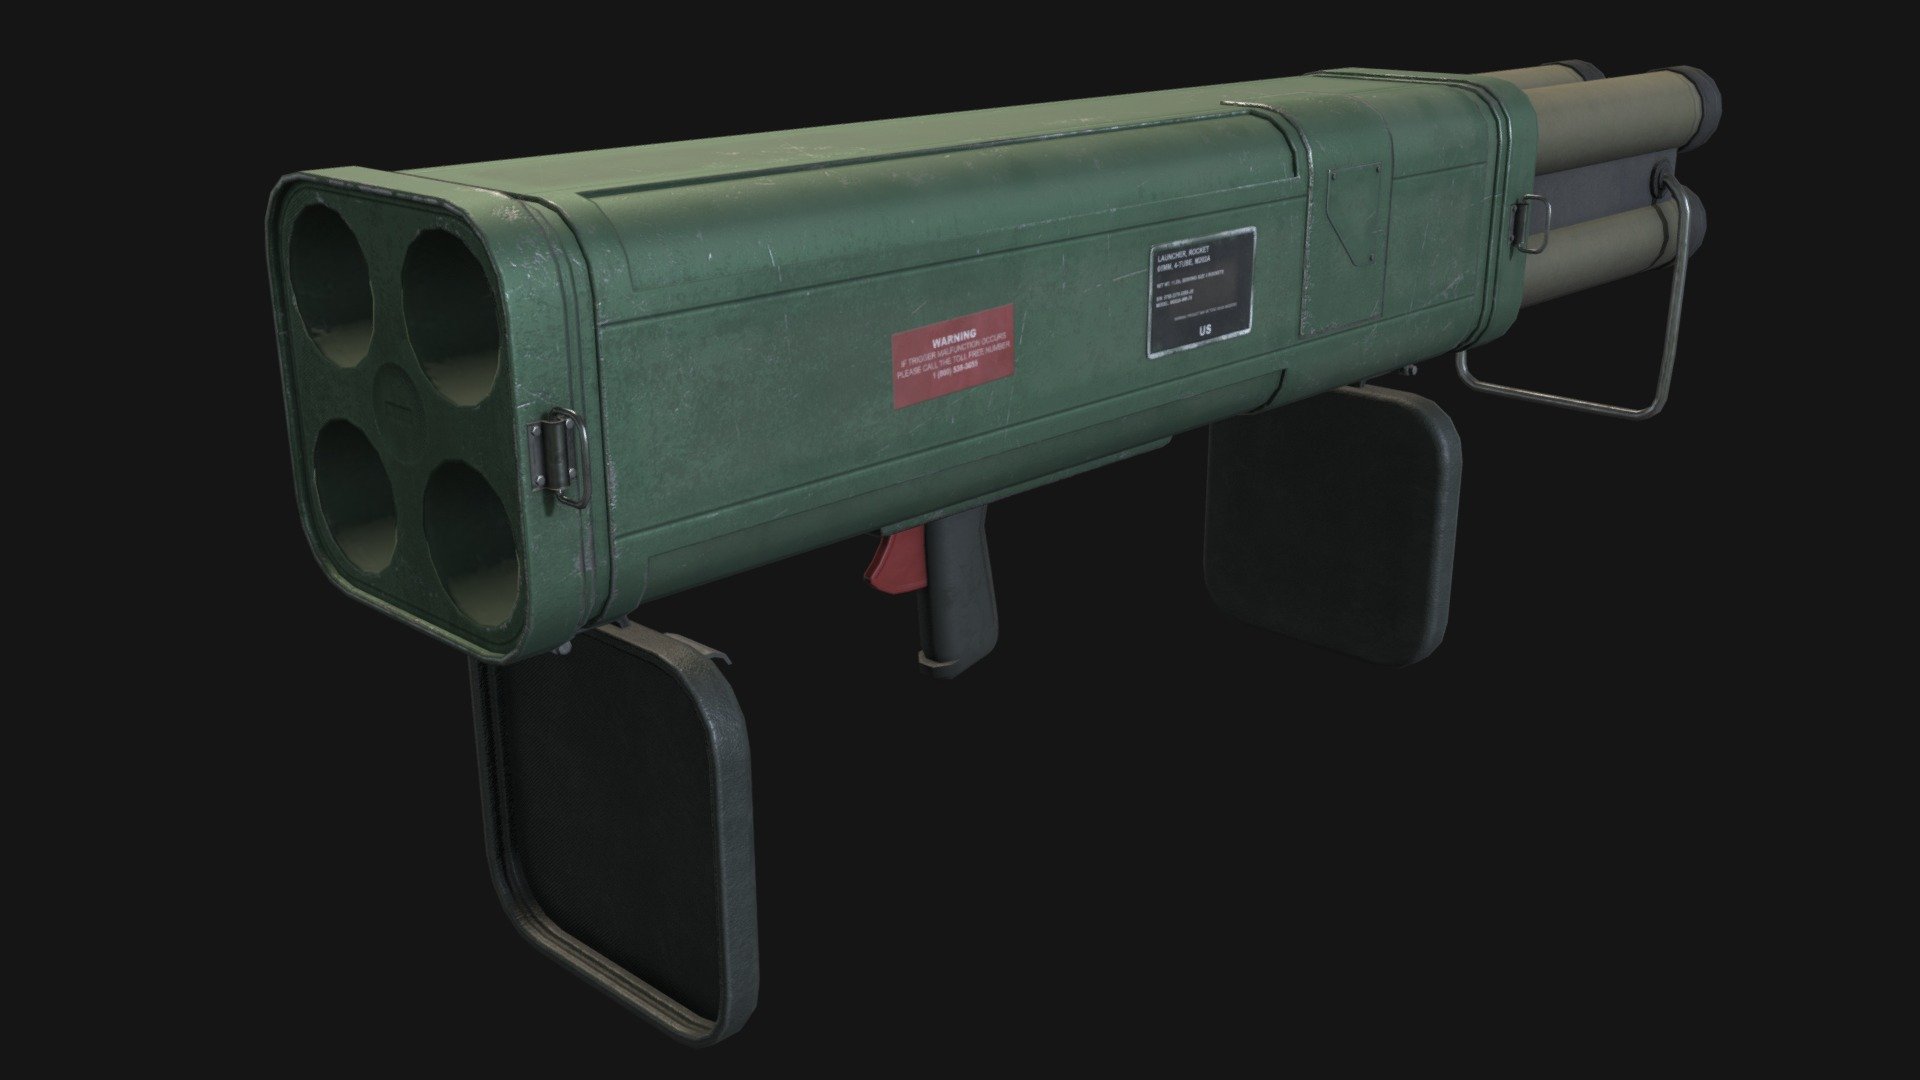 An M202 rocket launcher, seen in-game as the Quad Rocket Launcher. Obviously based on an M202 FLASH.

For Jabroni Brawl: Episode 3. https://store.steampowered.com/app/869480/Jabroni_Brawl_Episode_3/

Modelled in Blender, baked in Marmoset Toolbag, textured in Substance Painter 3d model